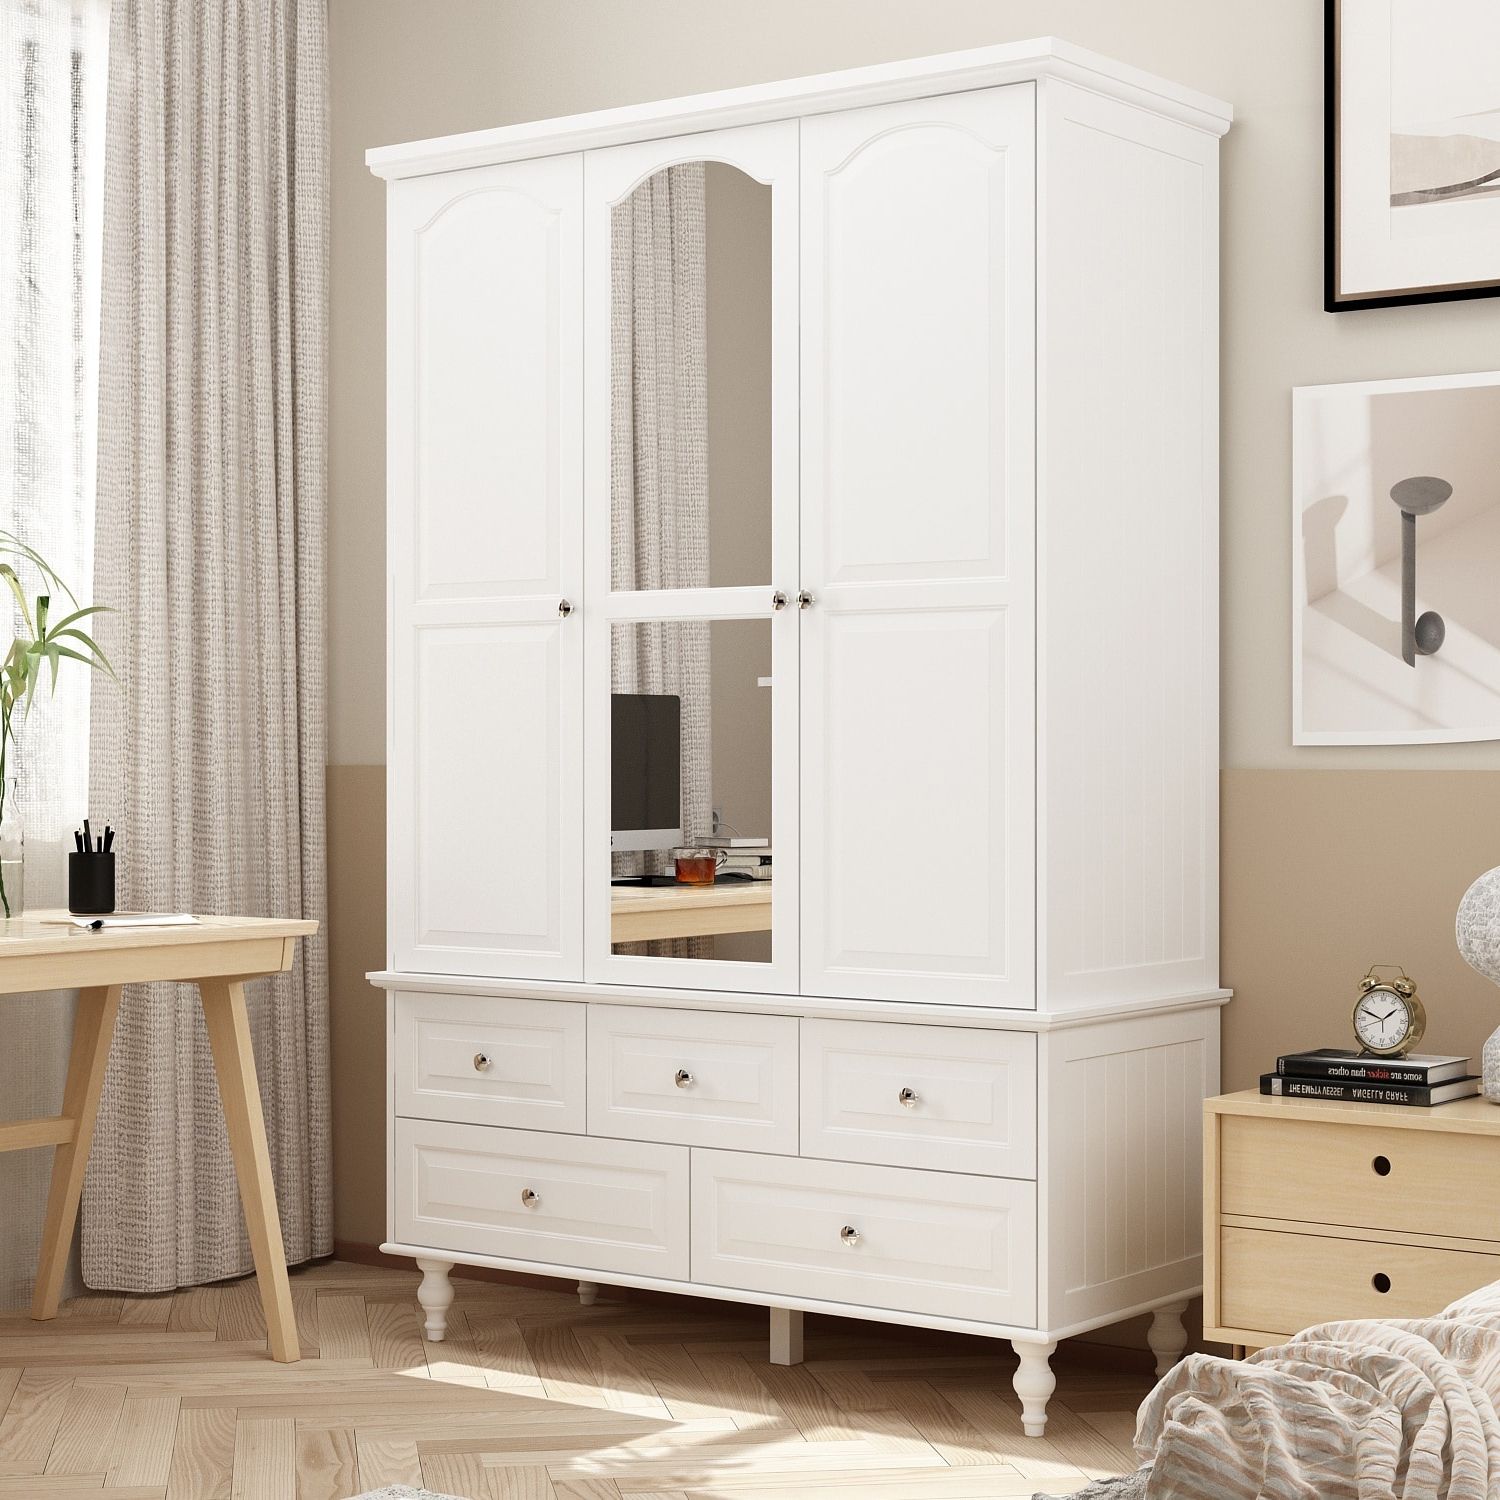 70.9"h White Lacquered Armoires Wardrobes With Mirror Doors – Bed Bath &  Beyond – 36679383 For White Wardrobes With Drawers And Mirror (Gallery 8 of 20)